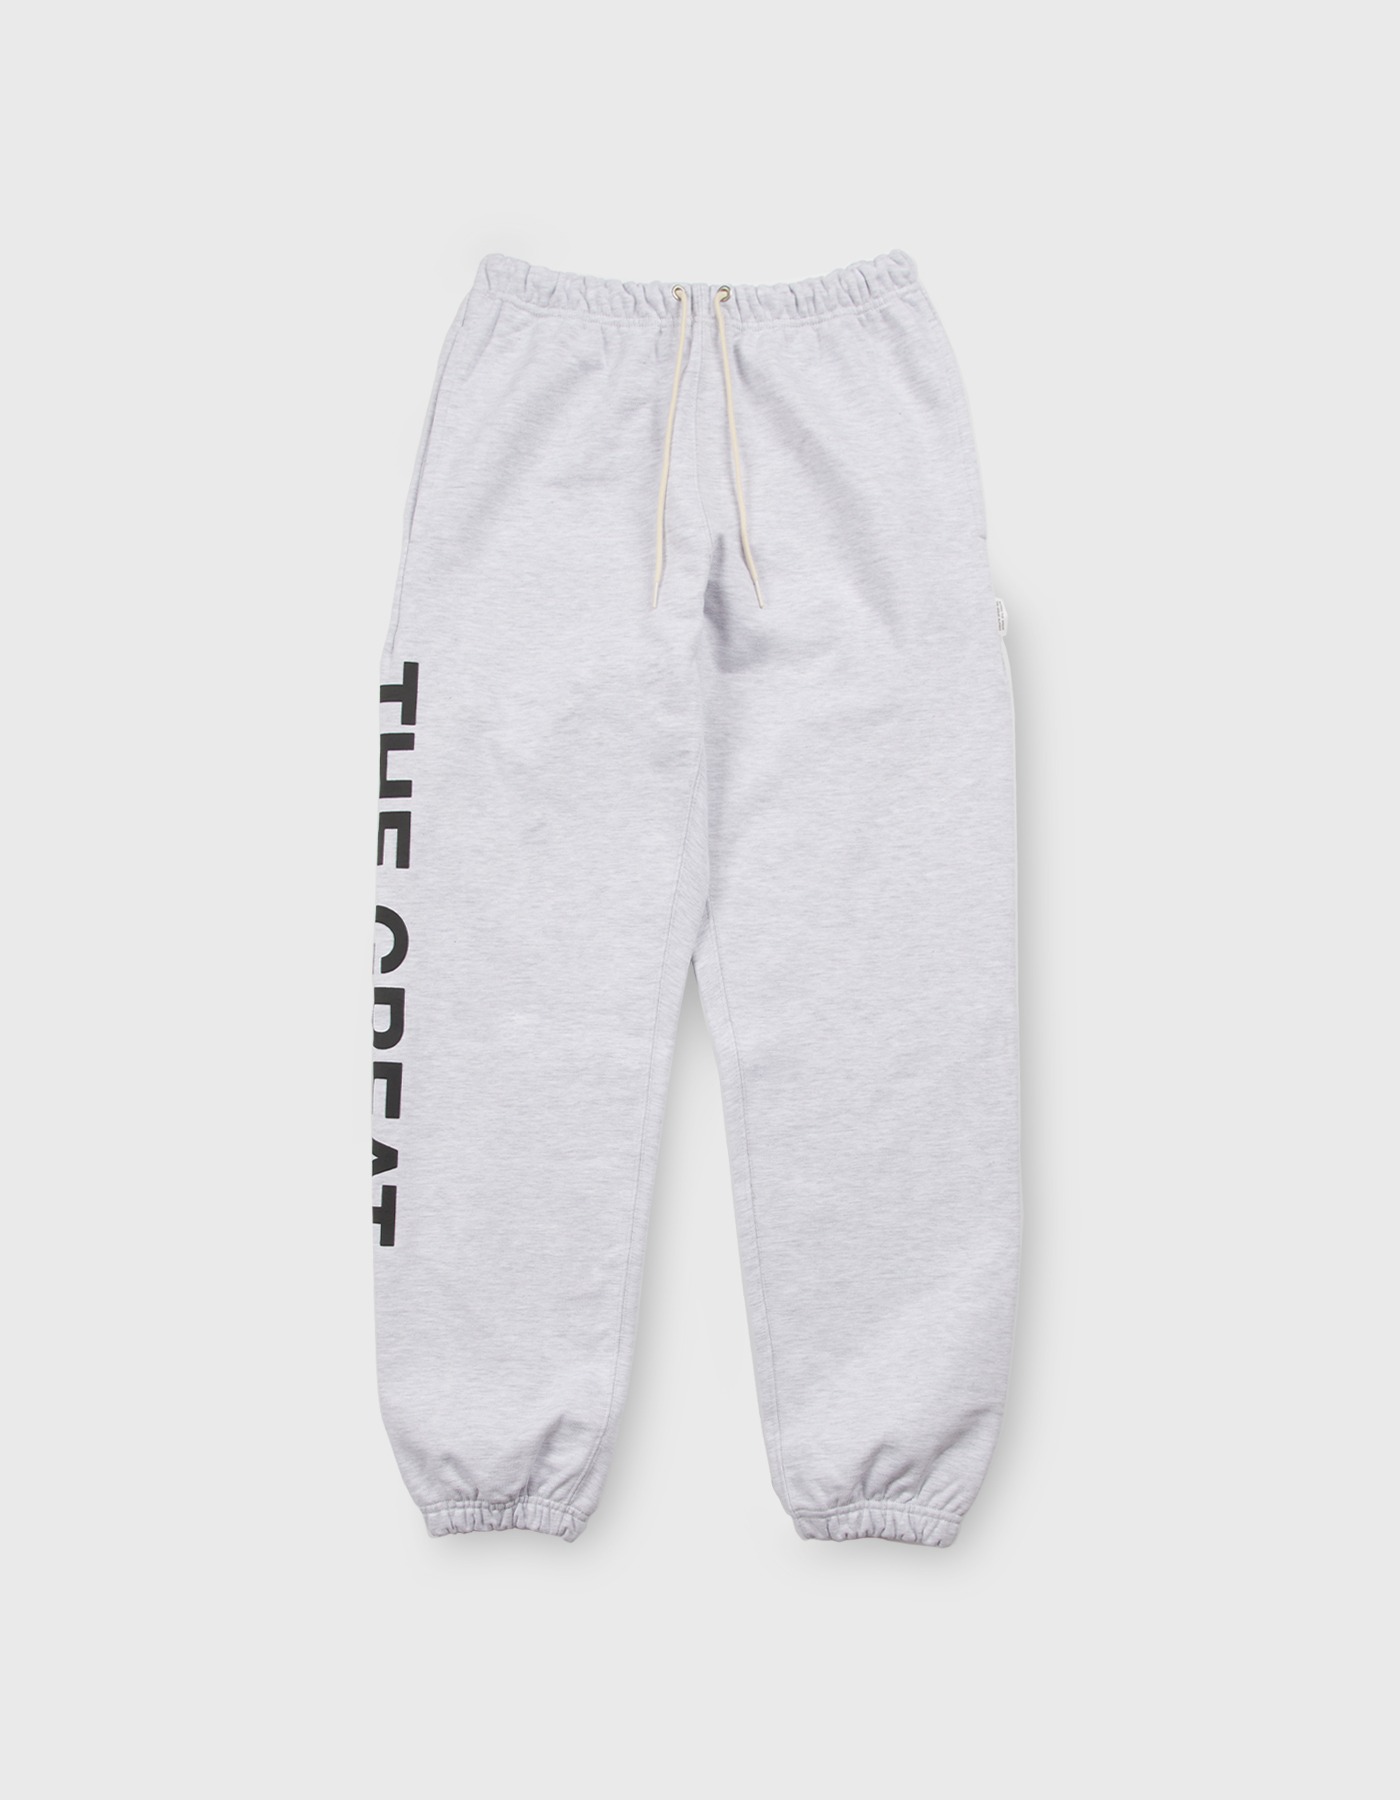 FRED THE GREAT JOGGER PANTS / M.grey(1%)